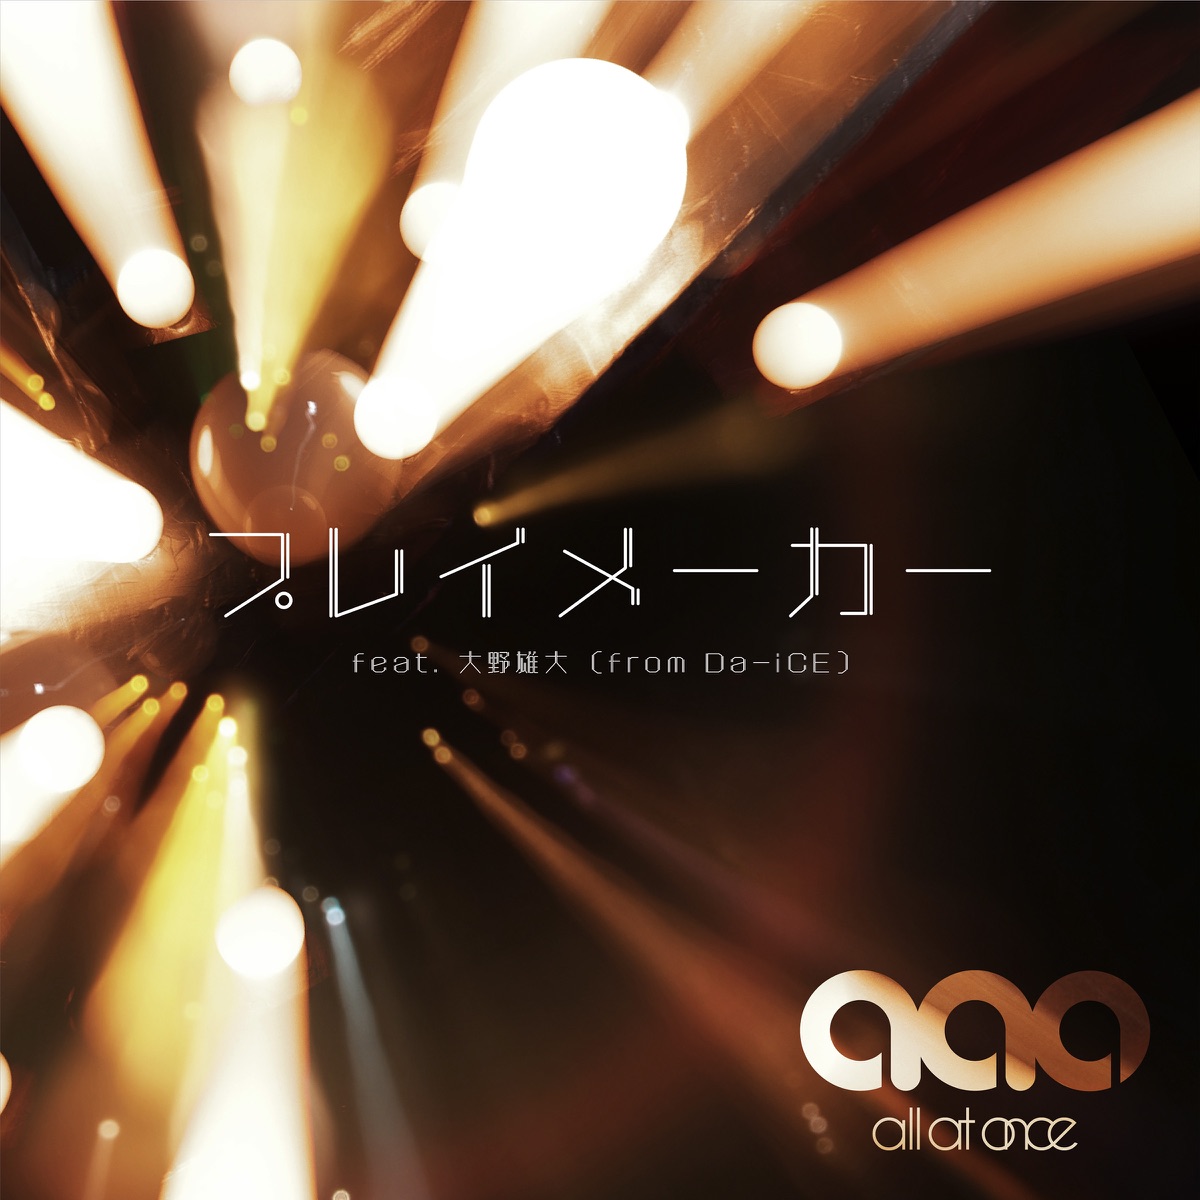 Cover art for『all at once - Playmaker feat. Yudai Ohno (from Da-iCE)』from the release『Playmaker feat. Yudai Ohno (from Da-iCE)』